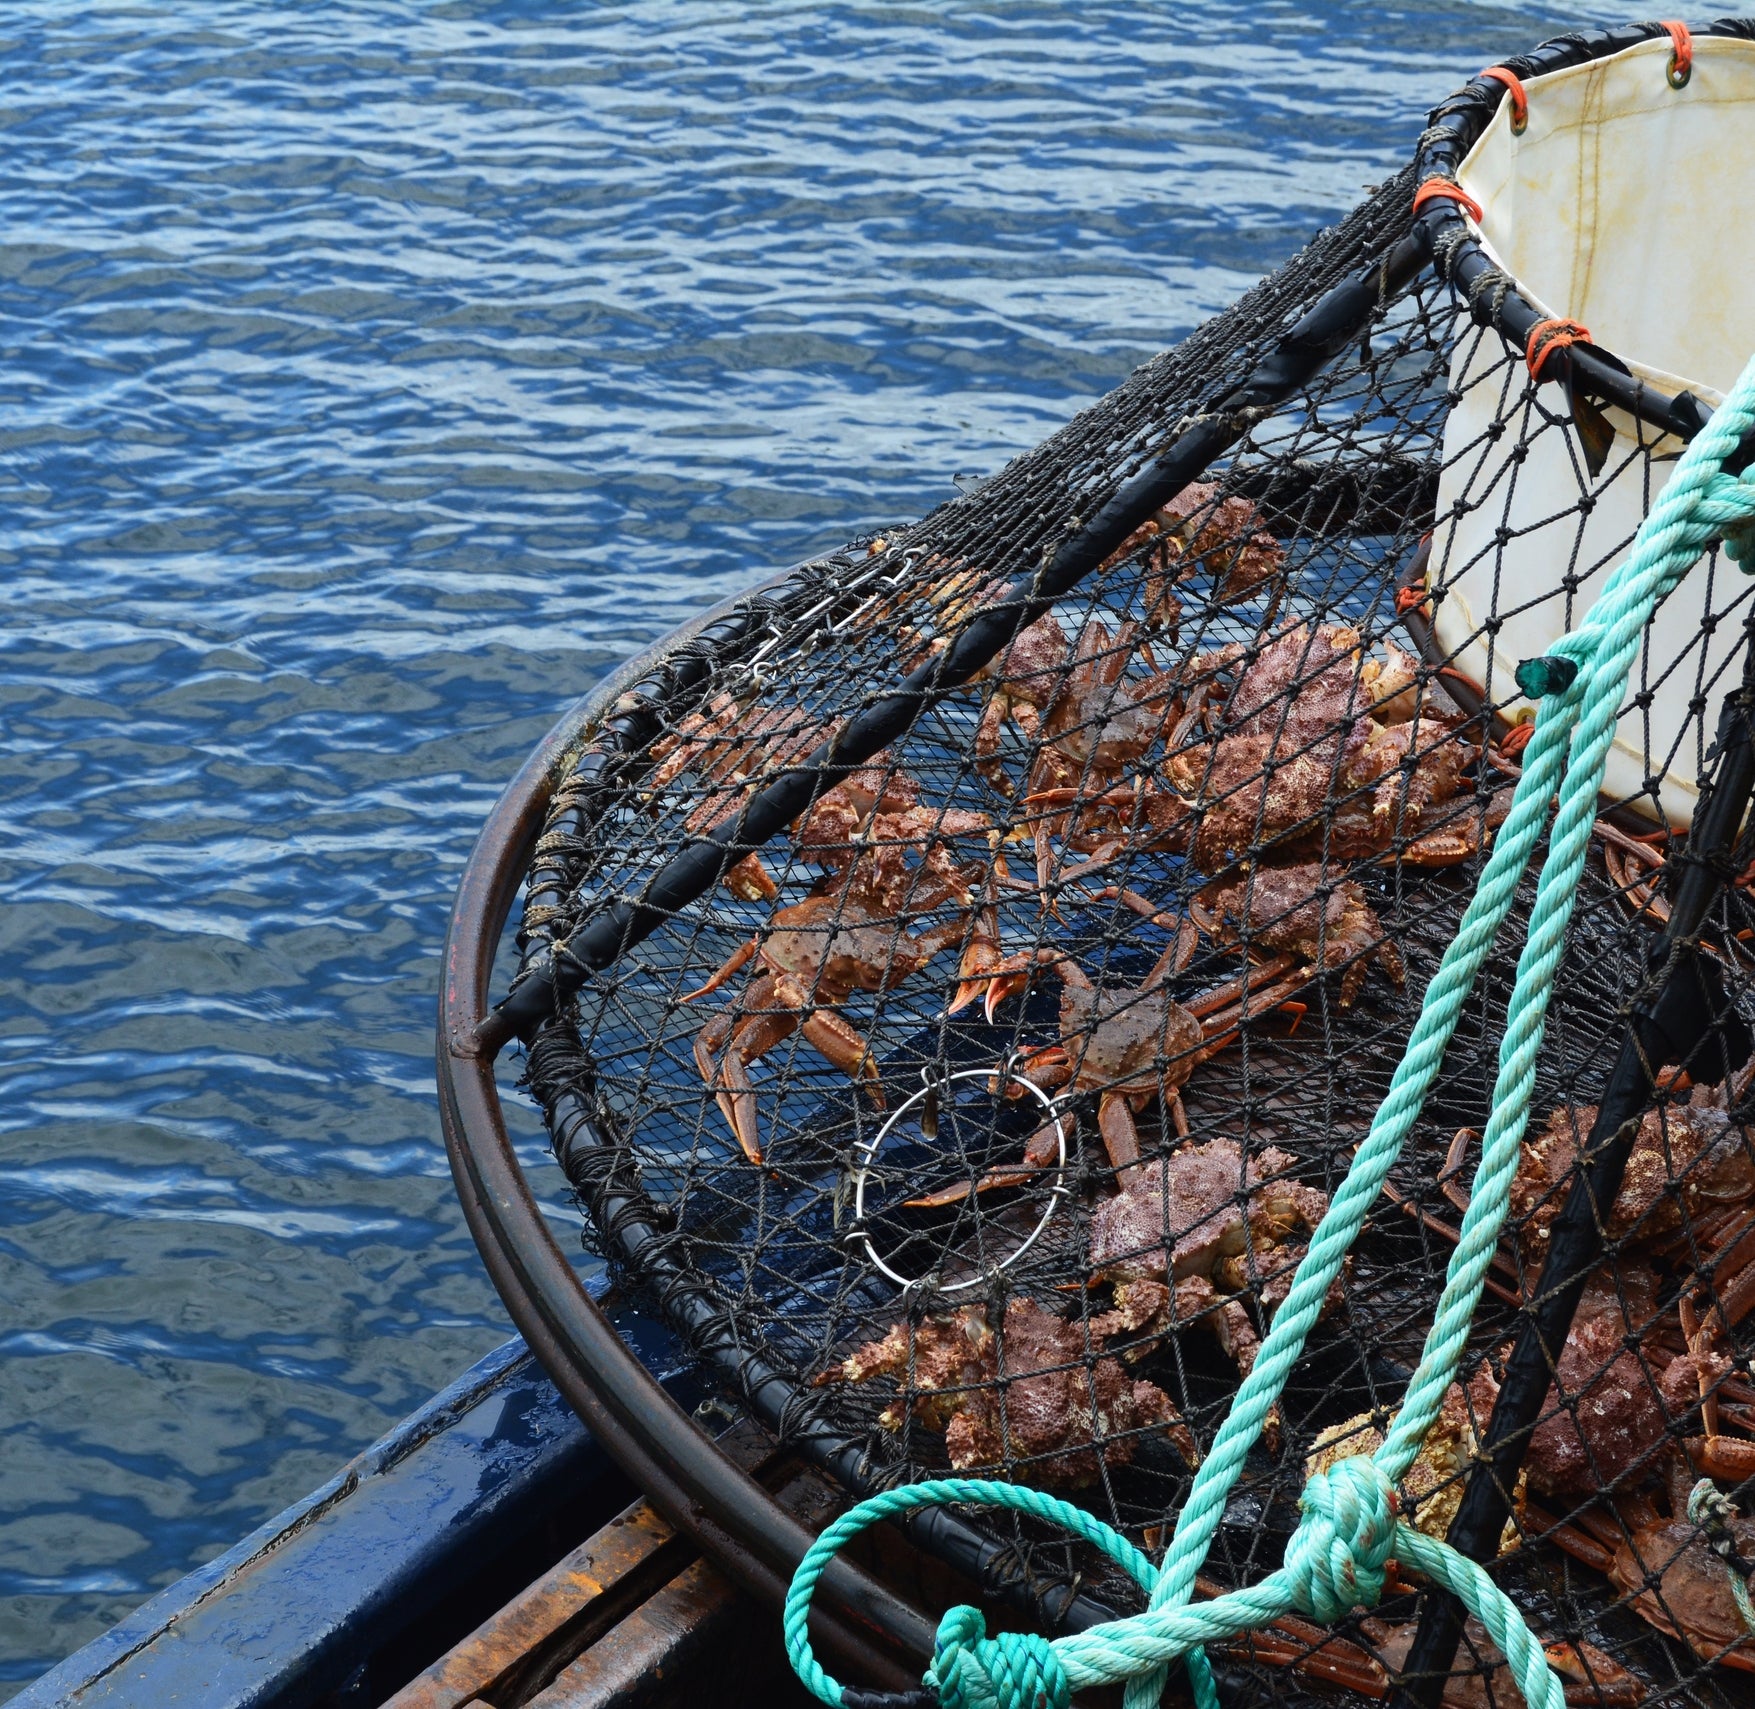  A crab trap on a dock with a crabbing net and bait.